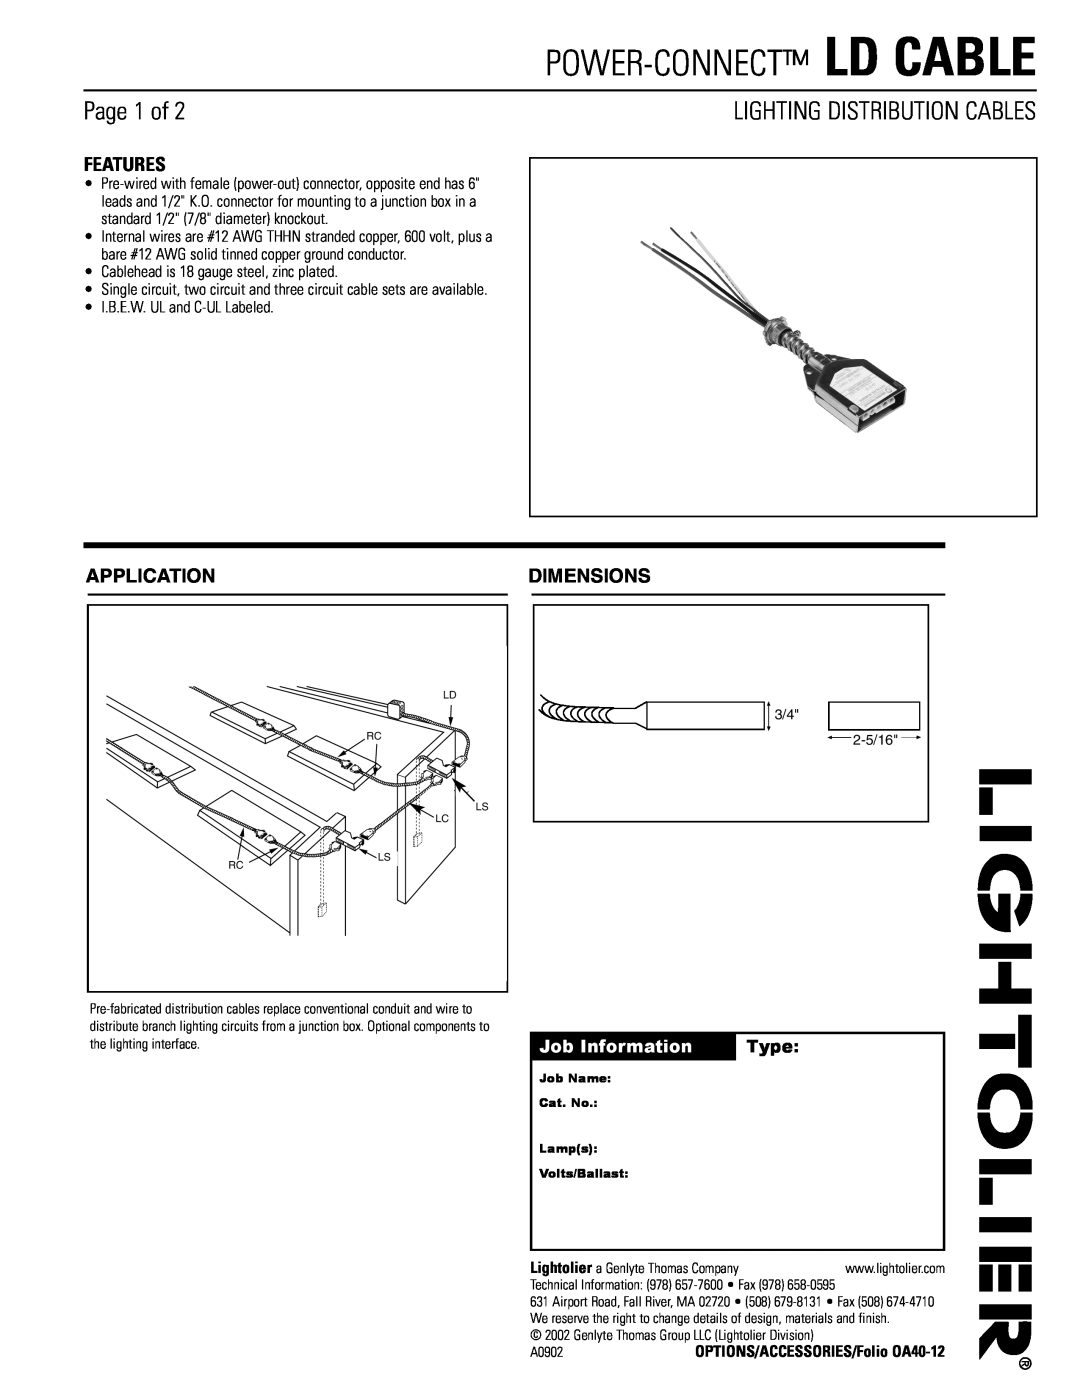 Lightolier LD Cable dimensions Page 1 of, Features, Job Information, Type, Cablehead is 18 gauge steel, zinc plated 